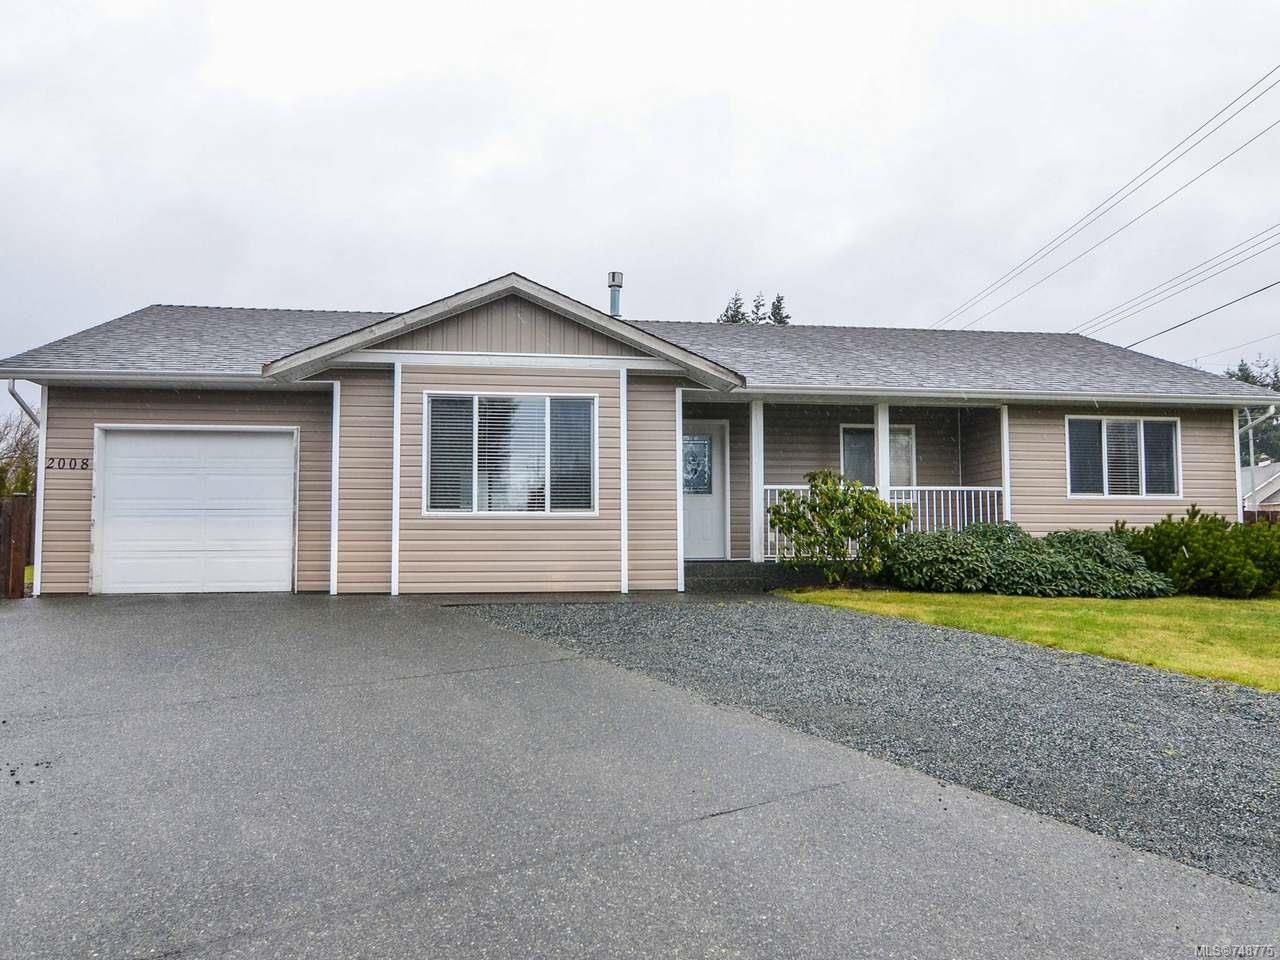 Main Photo: 2008 Eardley Rd in CAMPBELL RIVER: CR Willow Point House for sale (Campbell River)  : MLS®# 748775